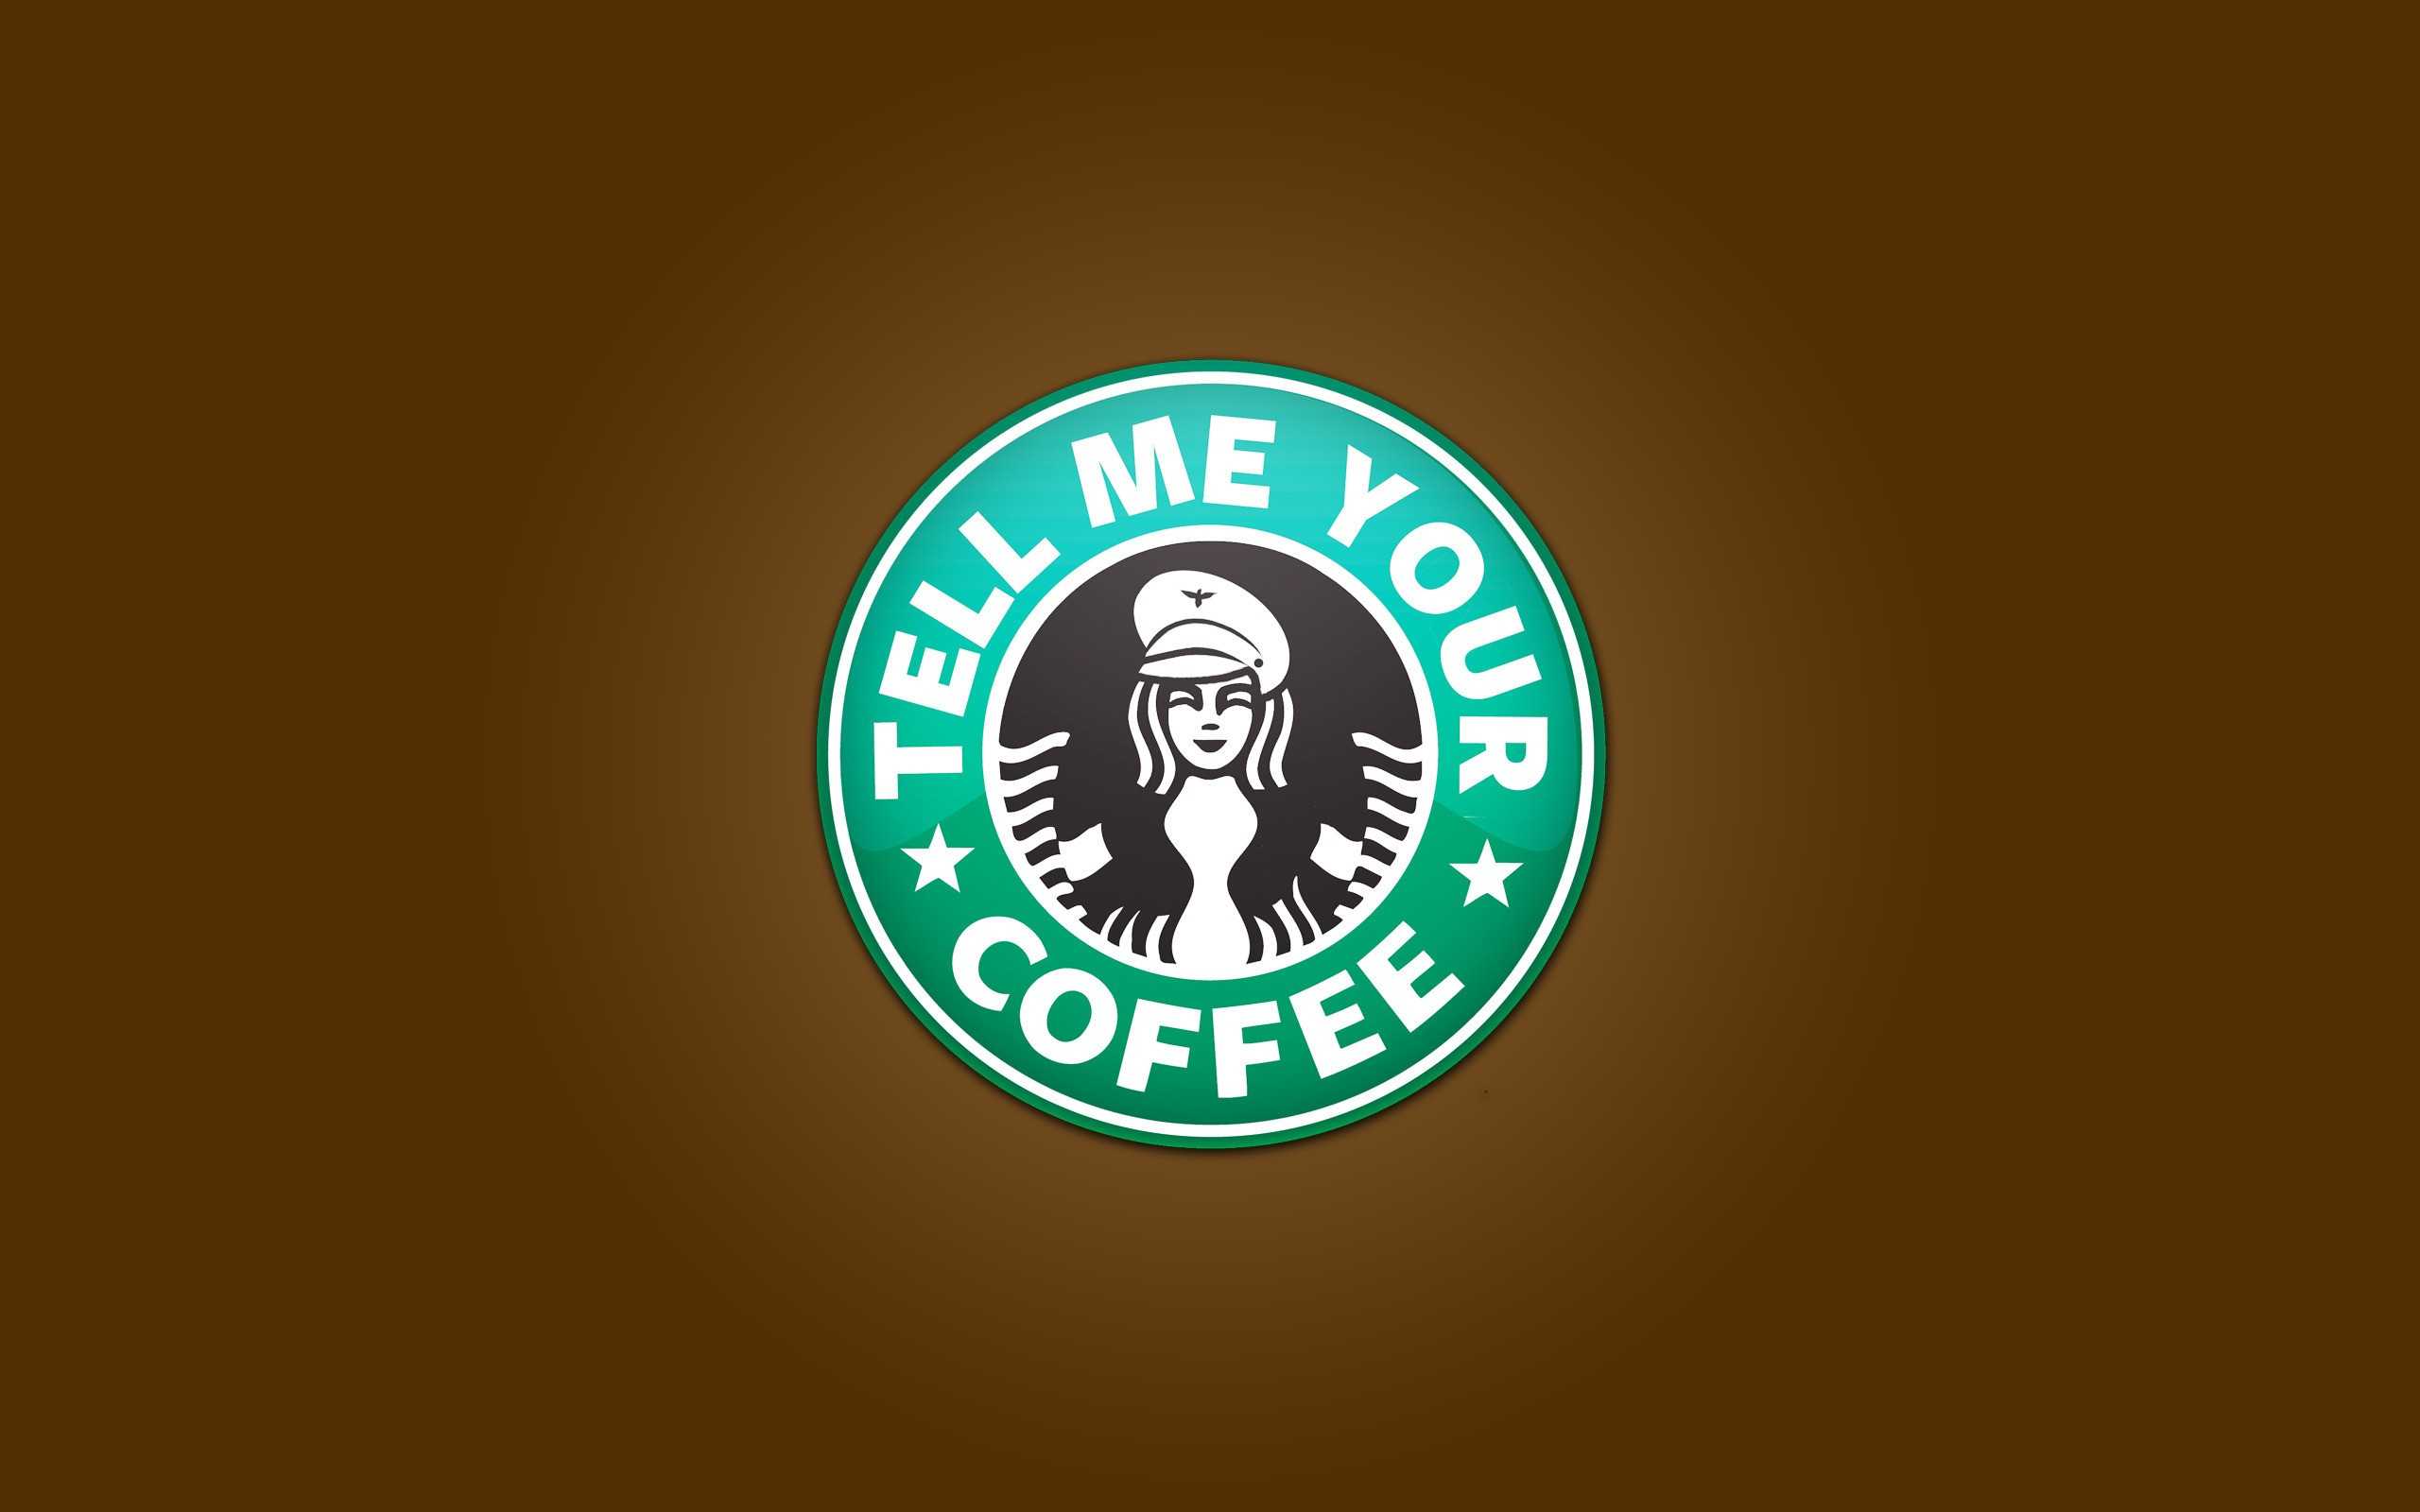 Starbucks Graphic Backgrounds For Powerpoint Templates – Ppt Regarding Starbucks Powerpoint Template